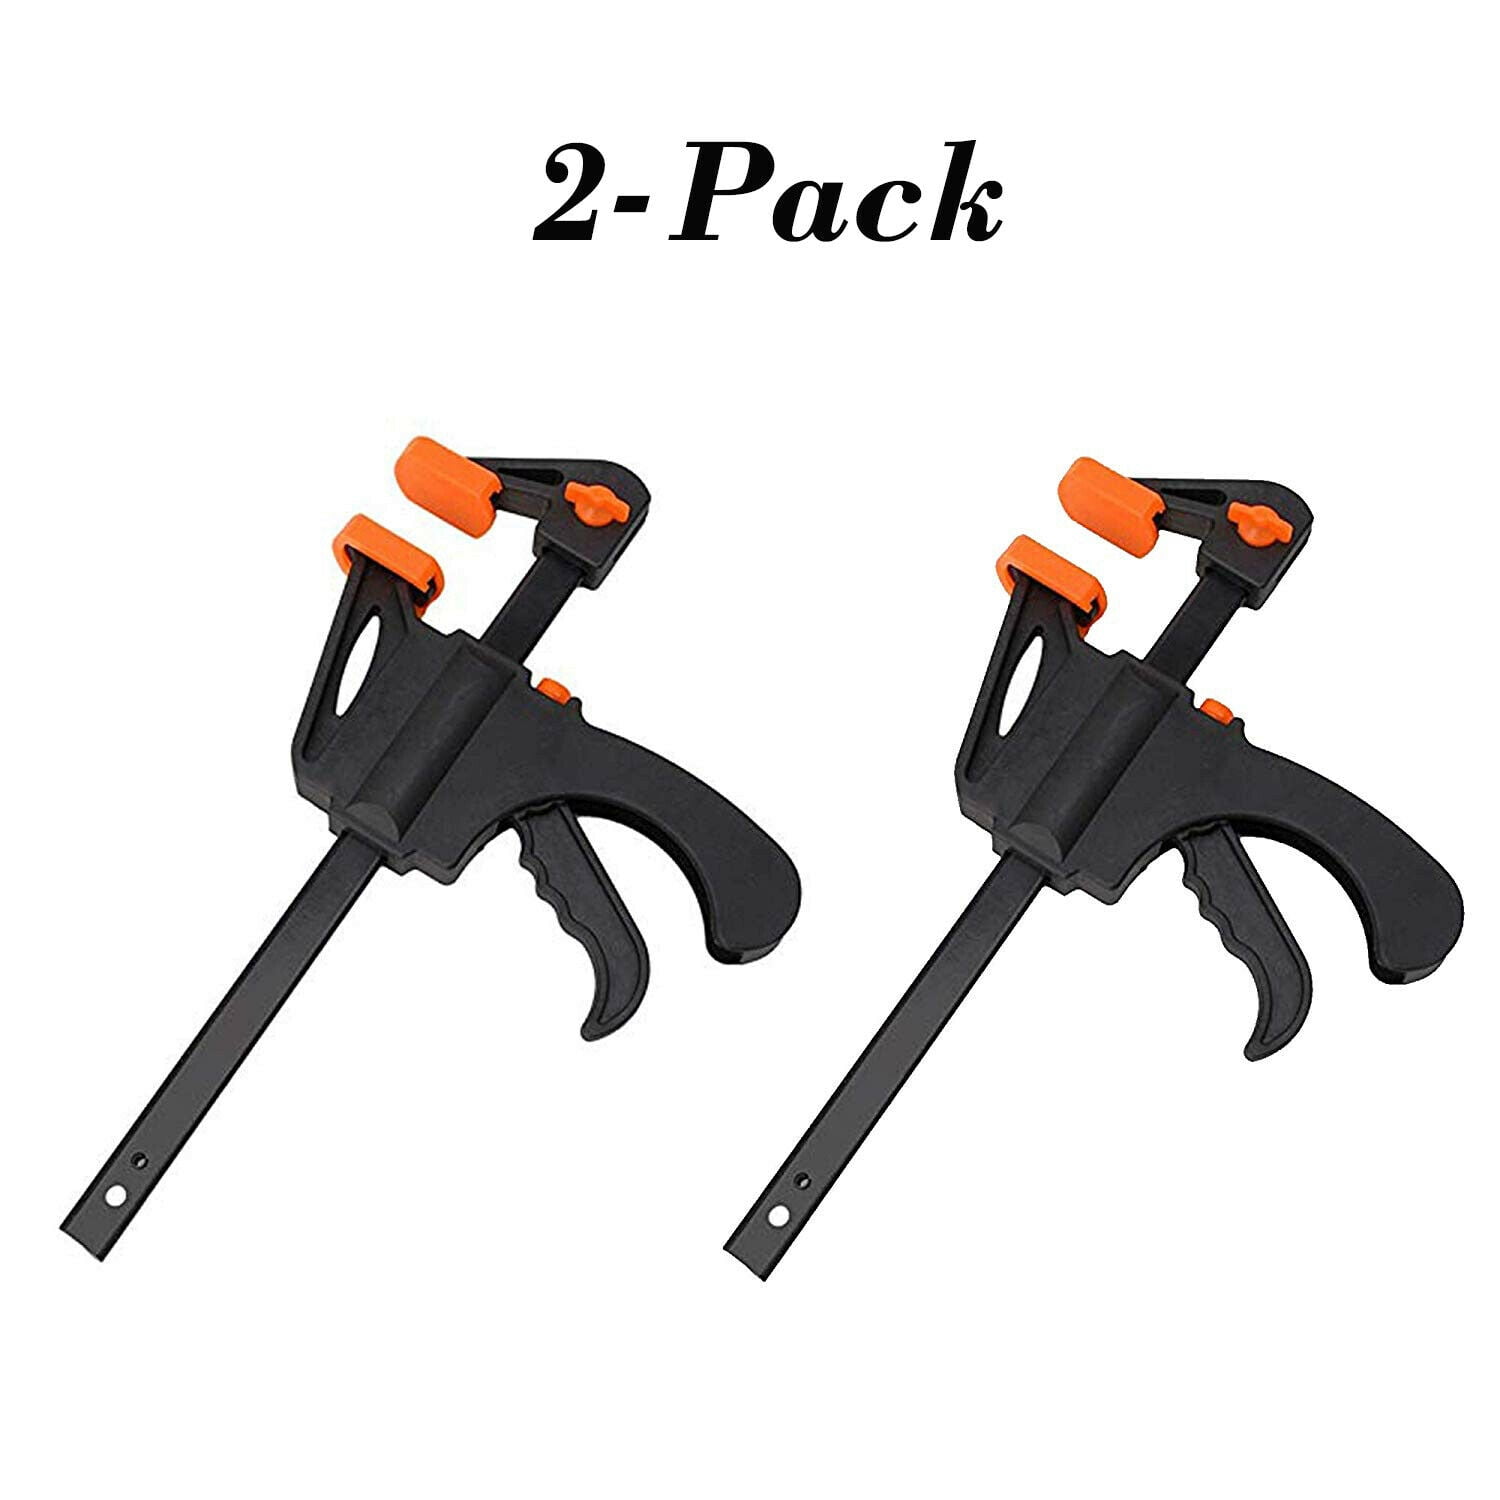 2 PACK One-Handed Mini 4-Inch Ratchet Bar Clamp QUICK-GRIP for Woodworking 